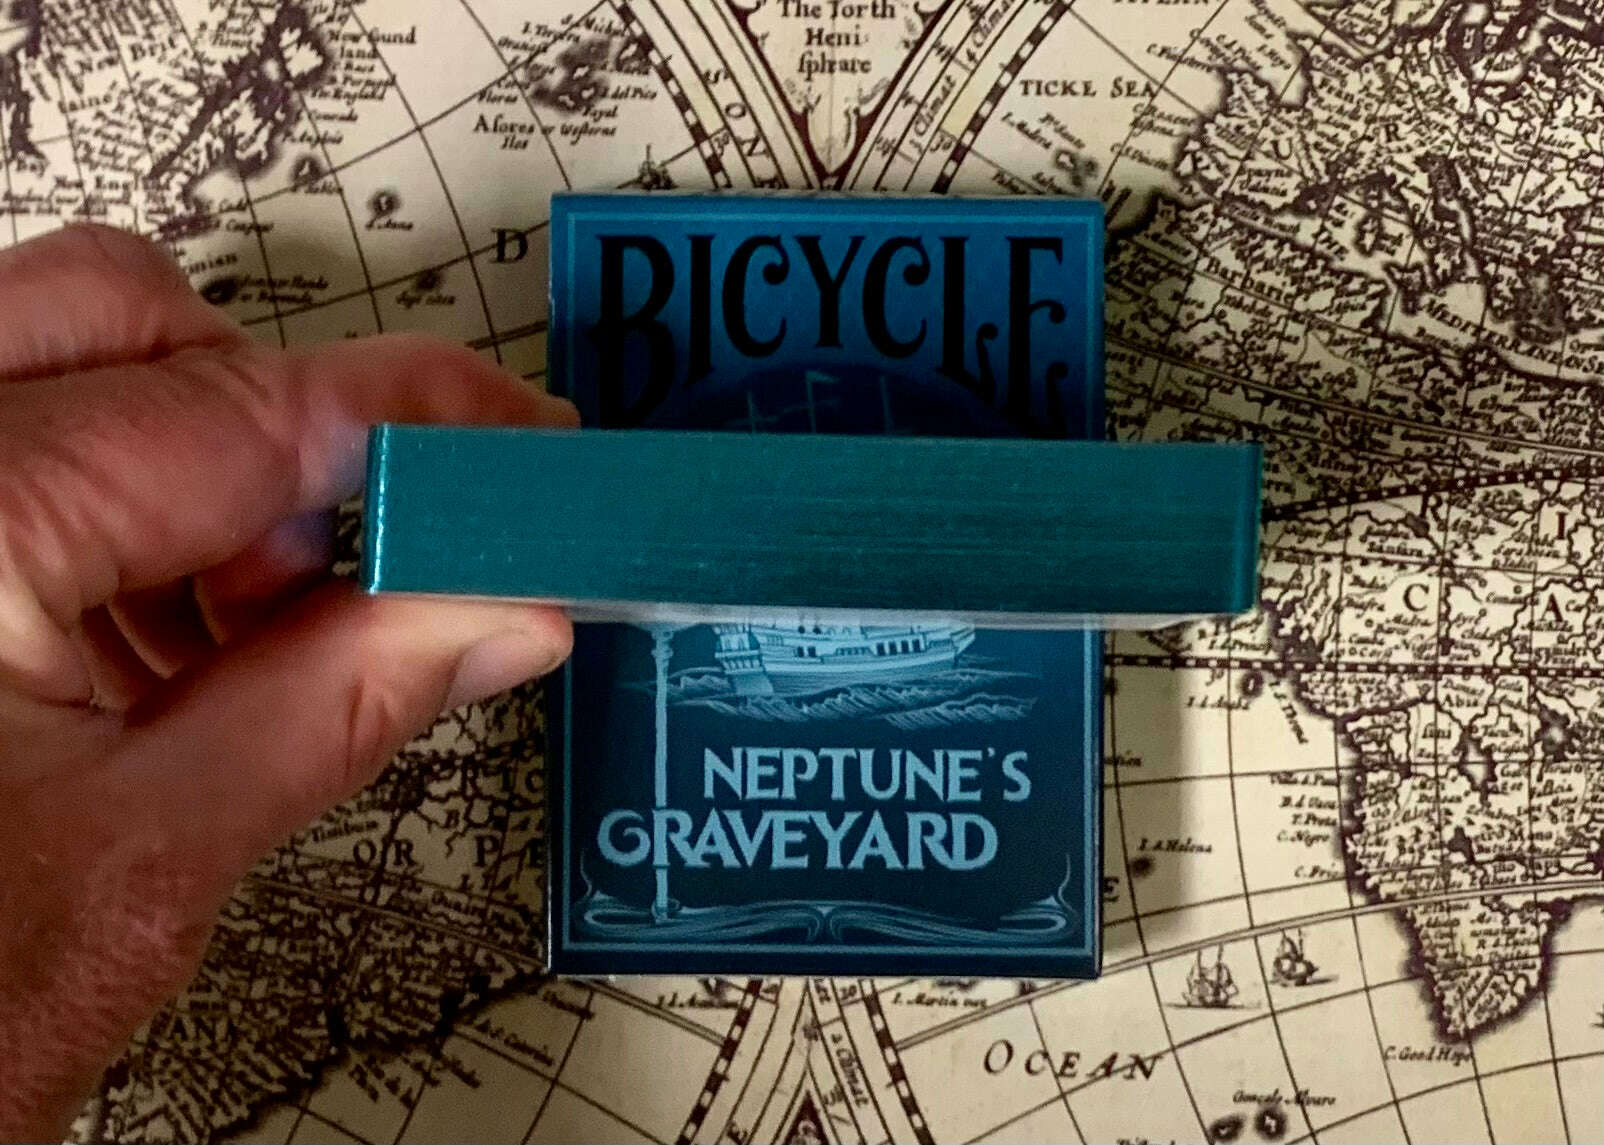 PlayingCardDecks.com-Neptune's Graveyard Gilded Bicycle Playing Cards: Ship